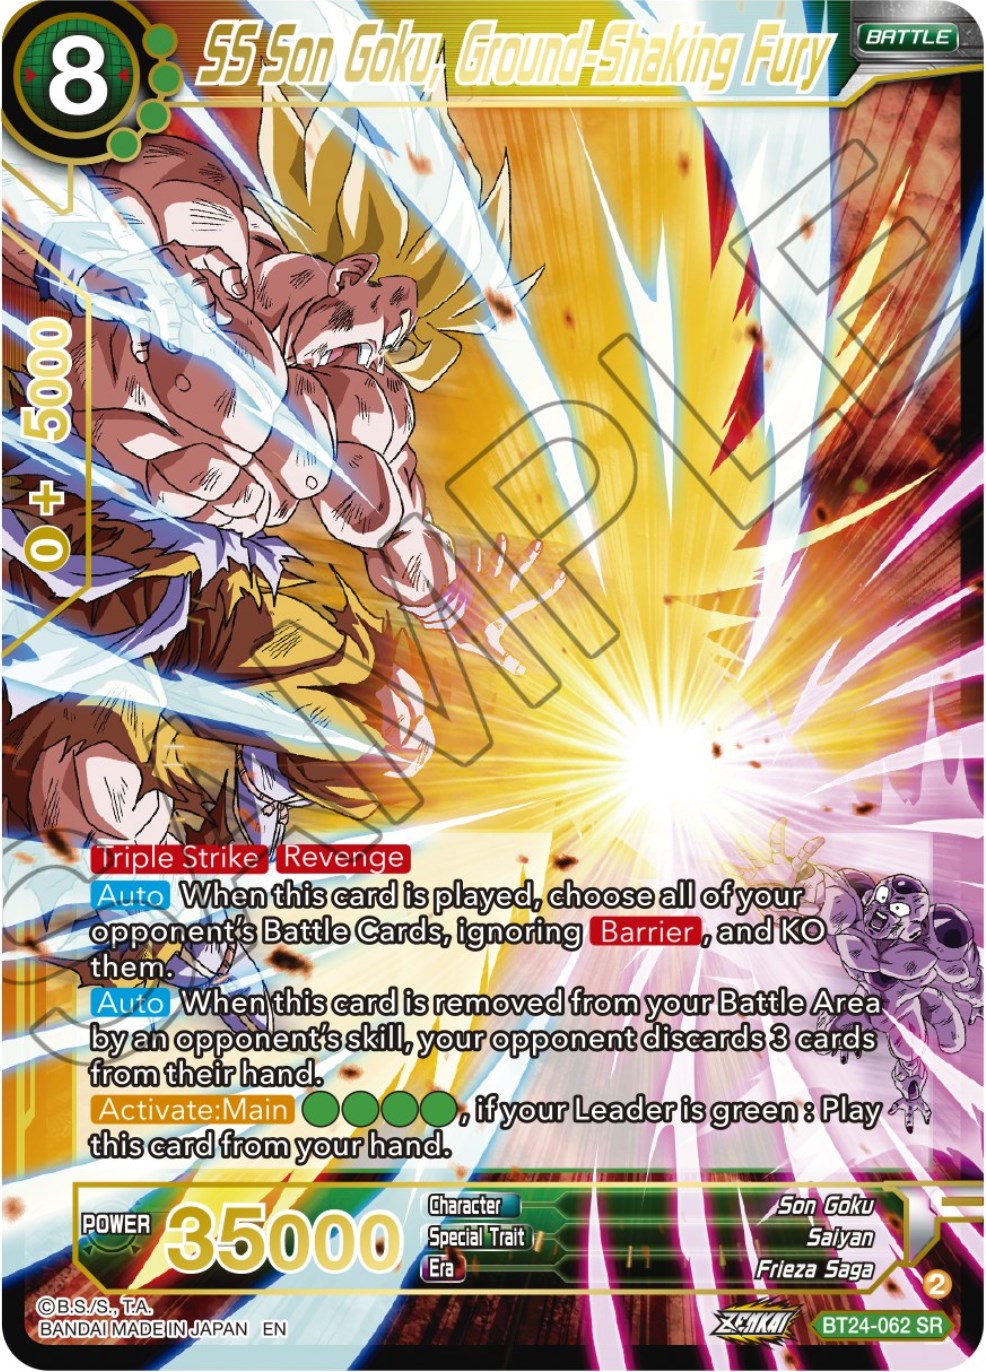 SS Son Goku, Ground-Shaking Fury (BT24-062) [Beyond Generations] | Total Play